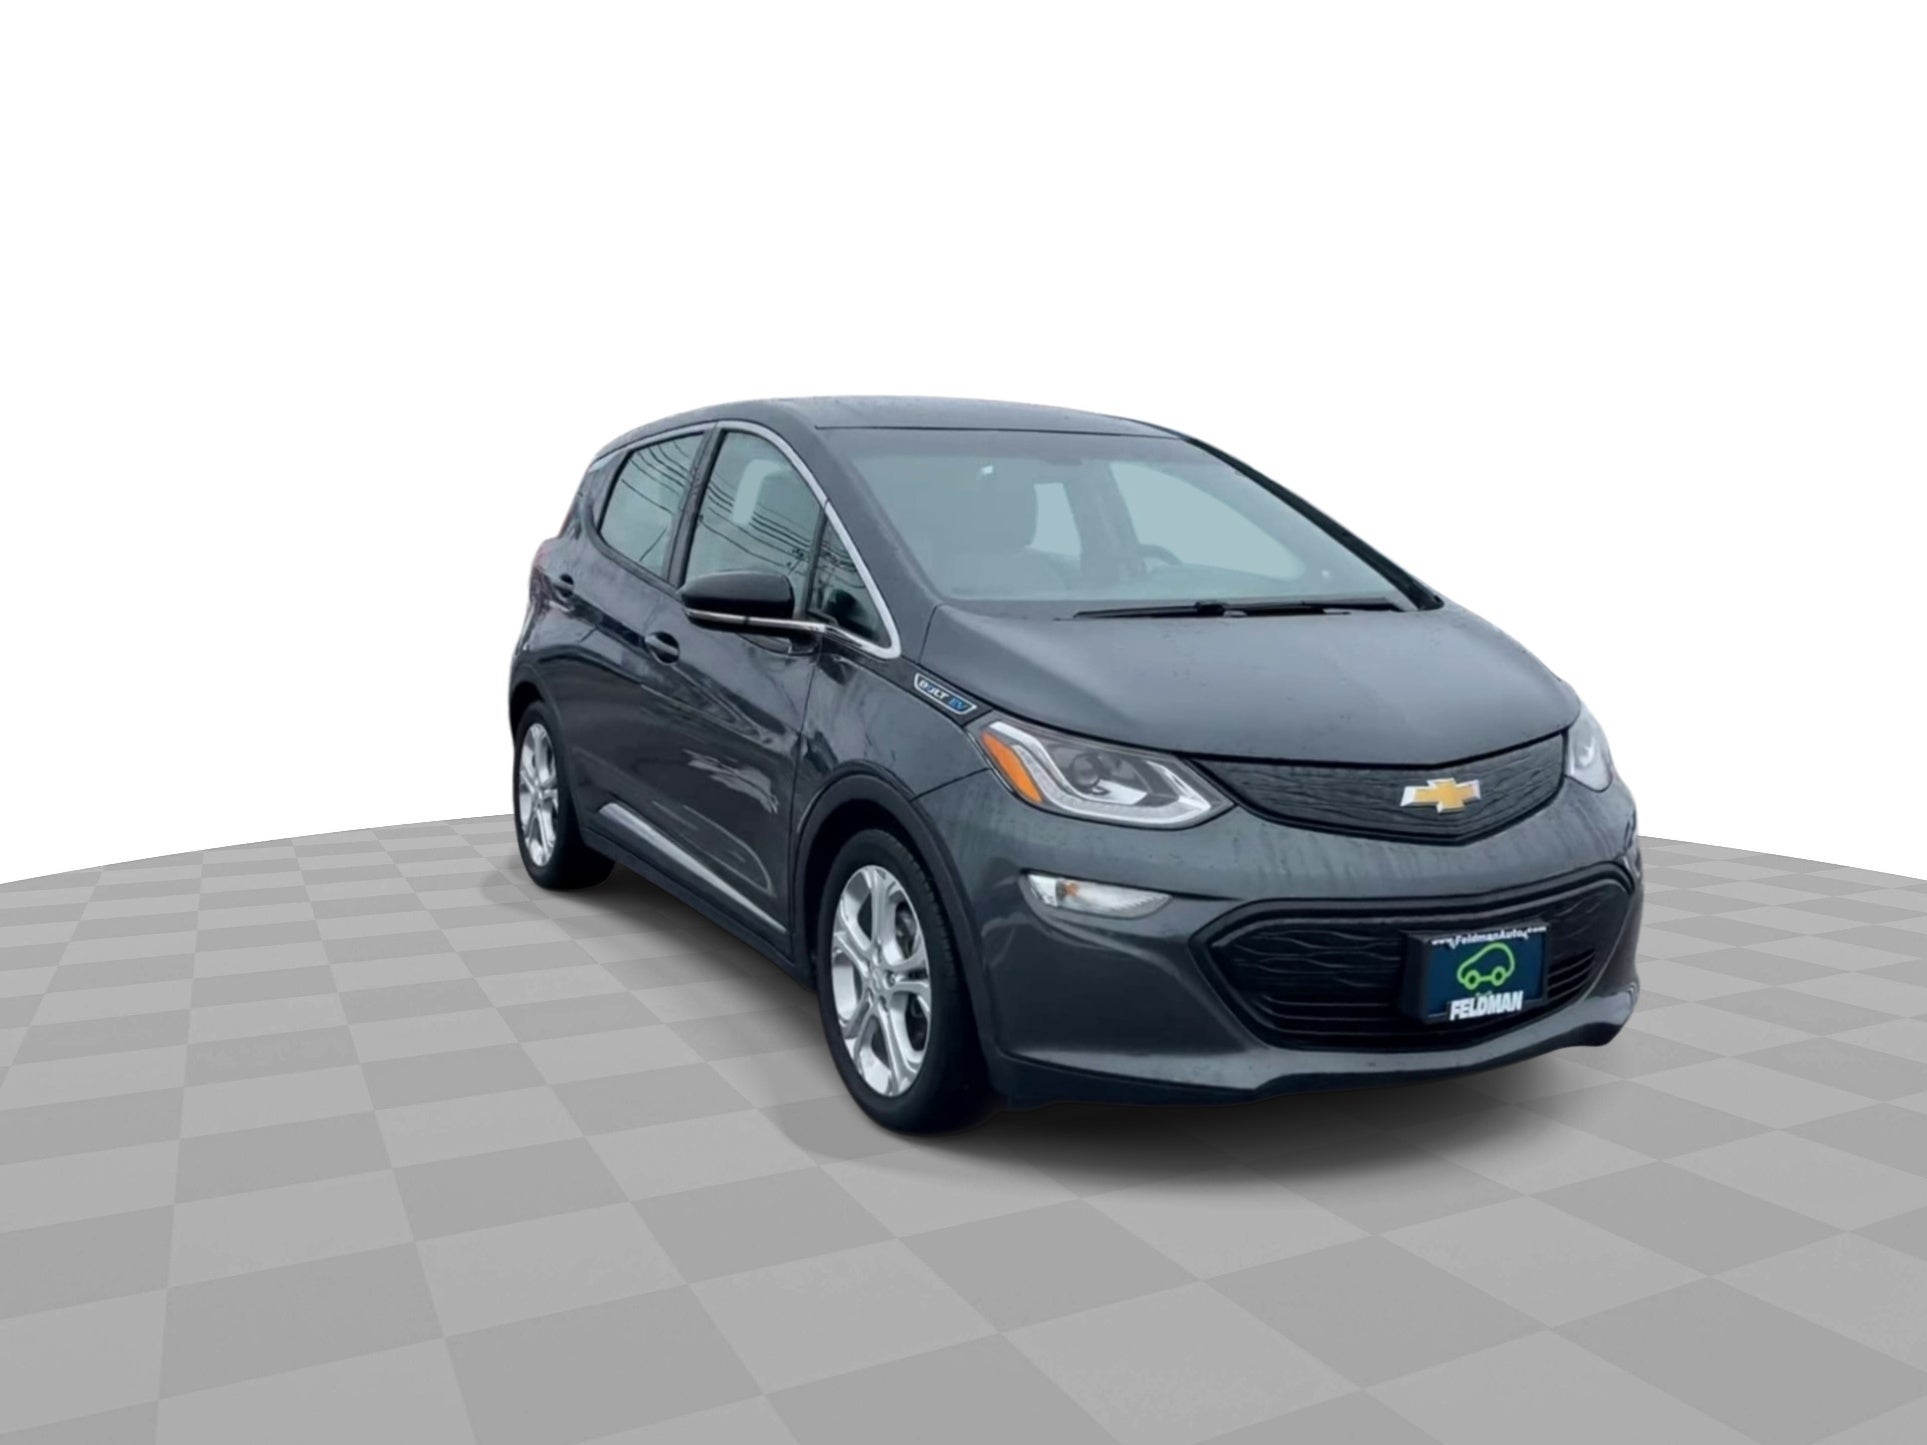 Used 2020 Chevrolet Bolt EV LT with VIN 1G1FY6S07L4136571 for sale in Livonia, MI